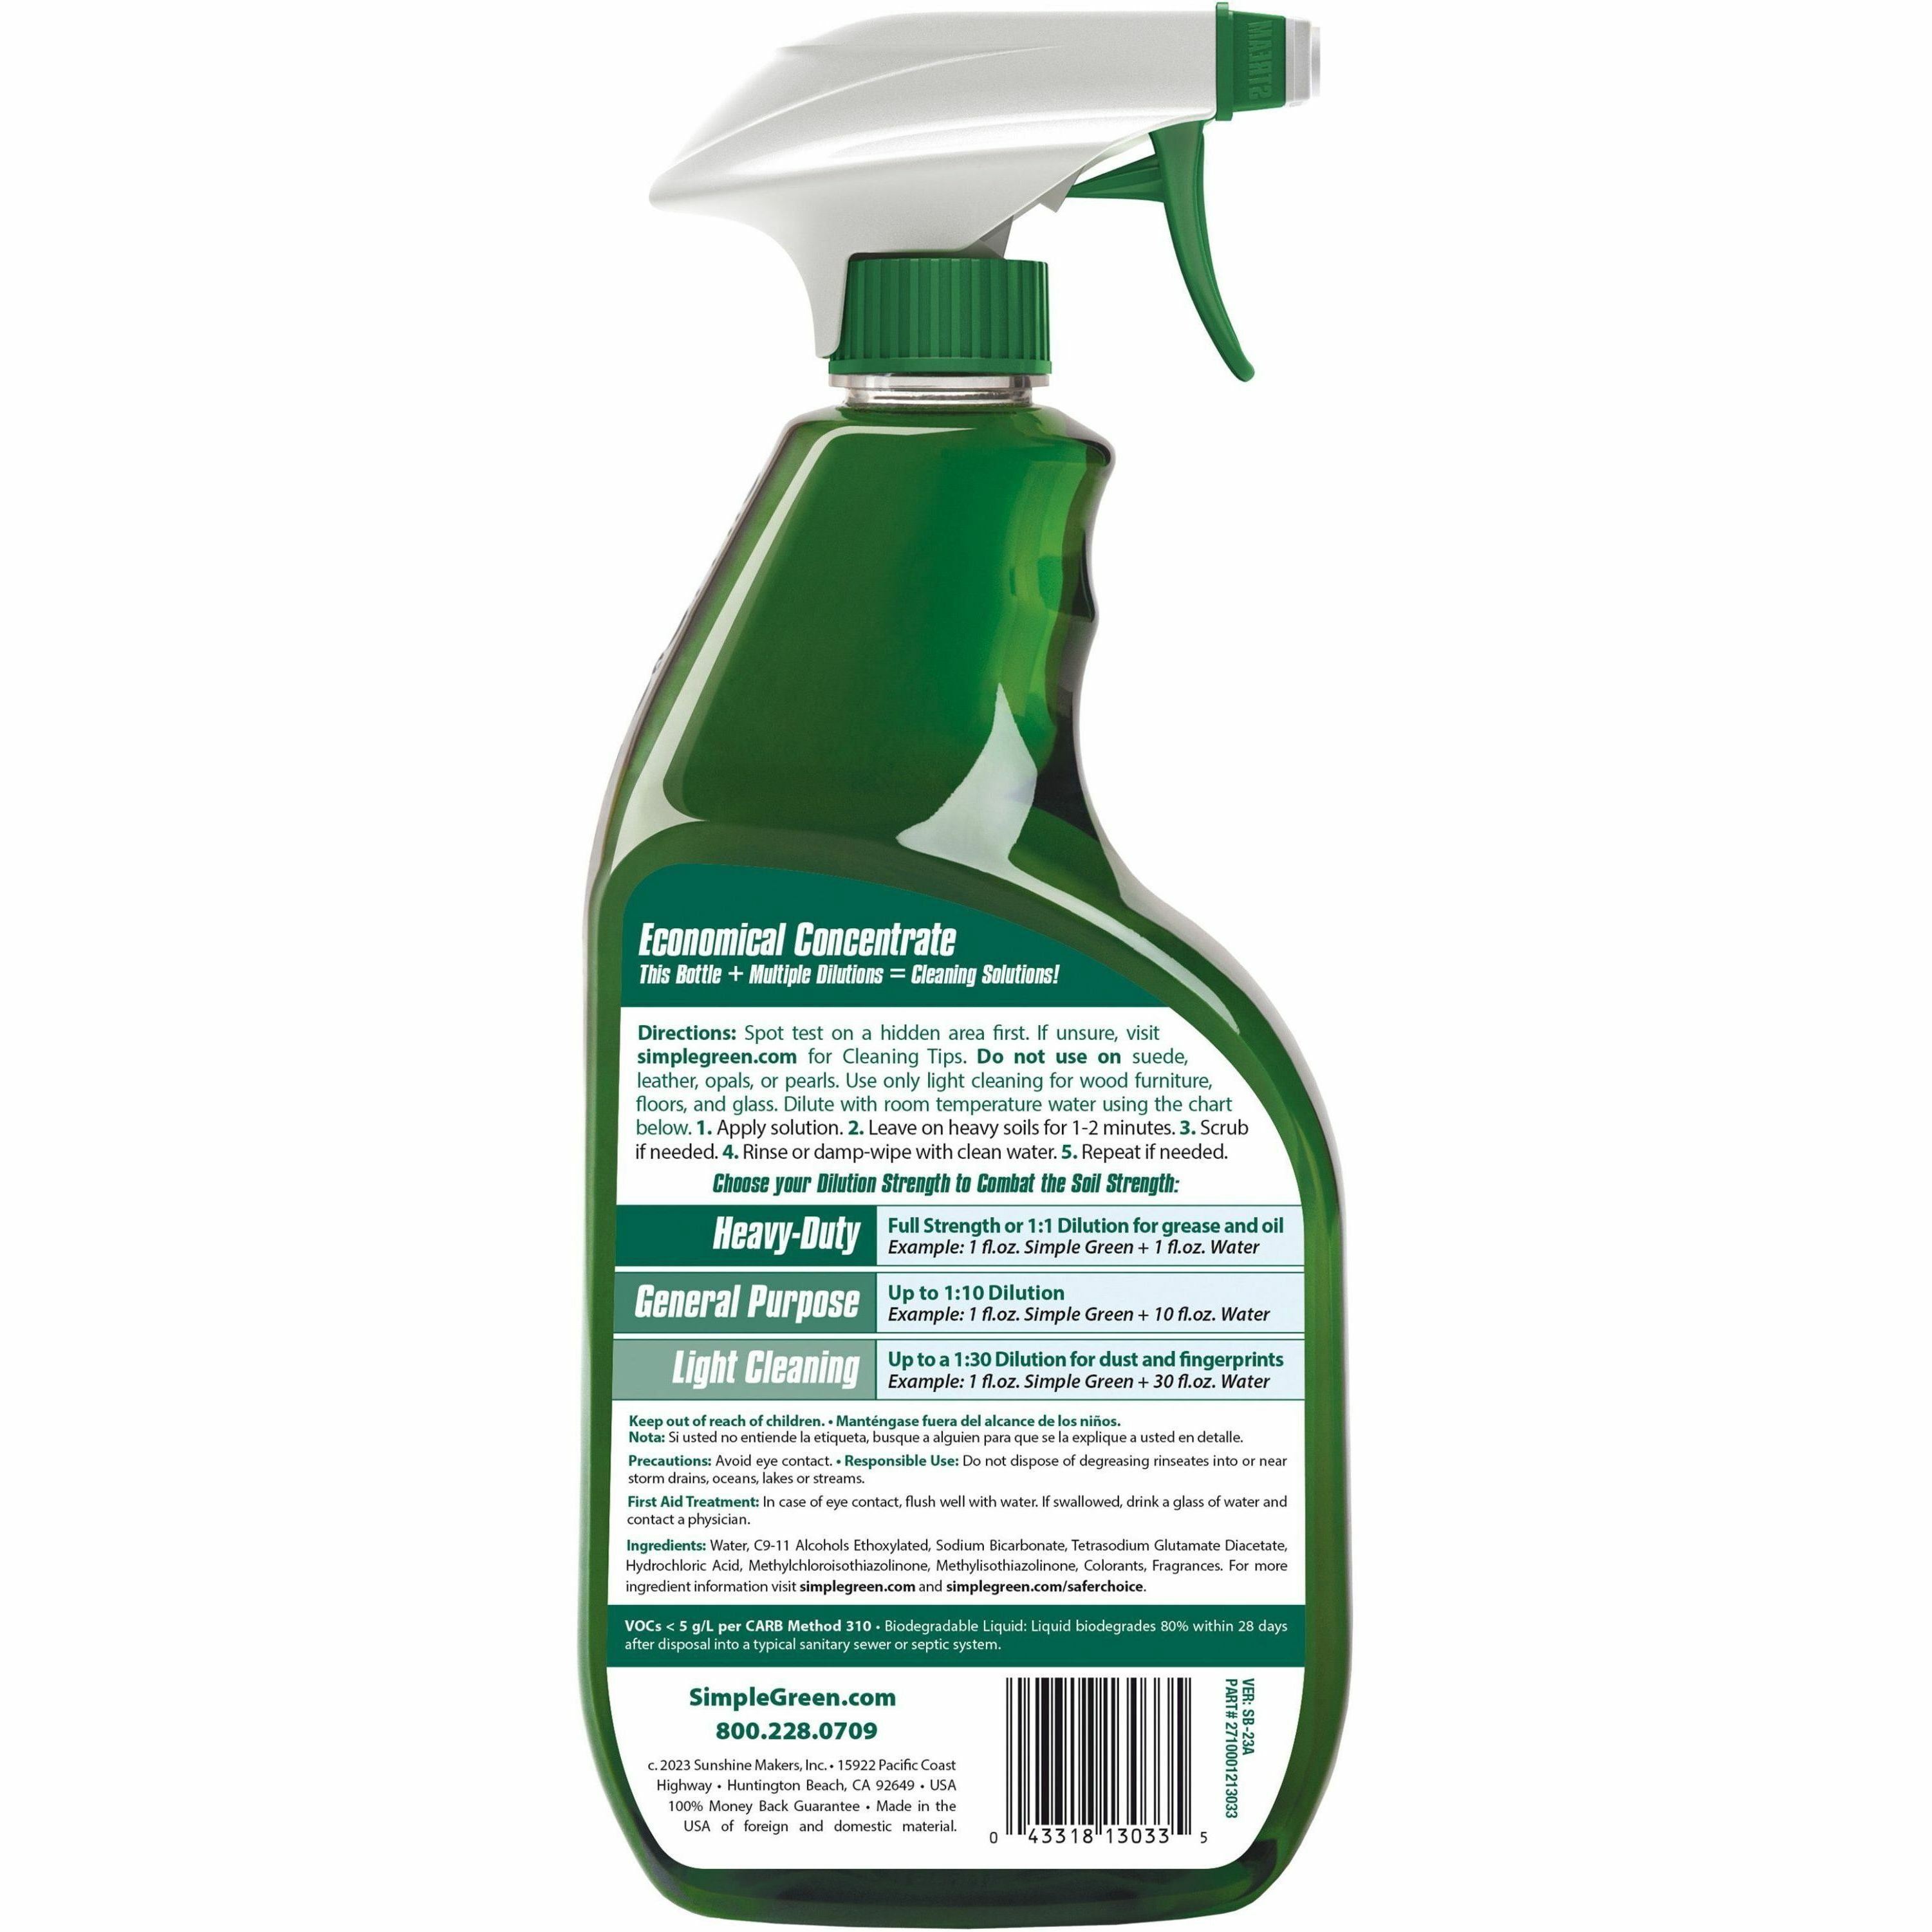 simple-green-all-purpose-concentrated-cleaner-concentrate-32-fl-oz-1-quart-12-carton-non-toxic-streak-free-smudge-free-green_smp13033ct - 2